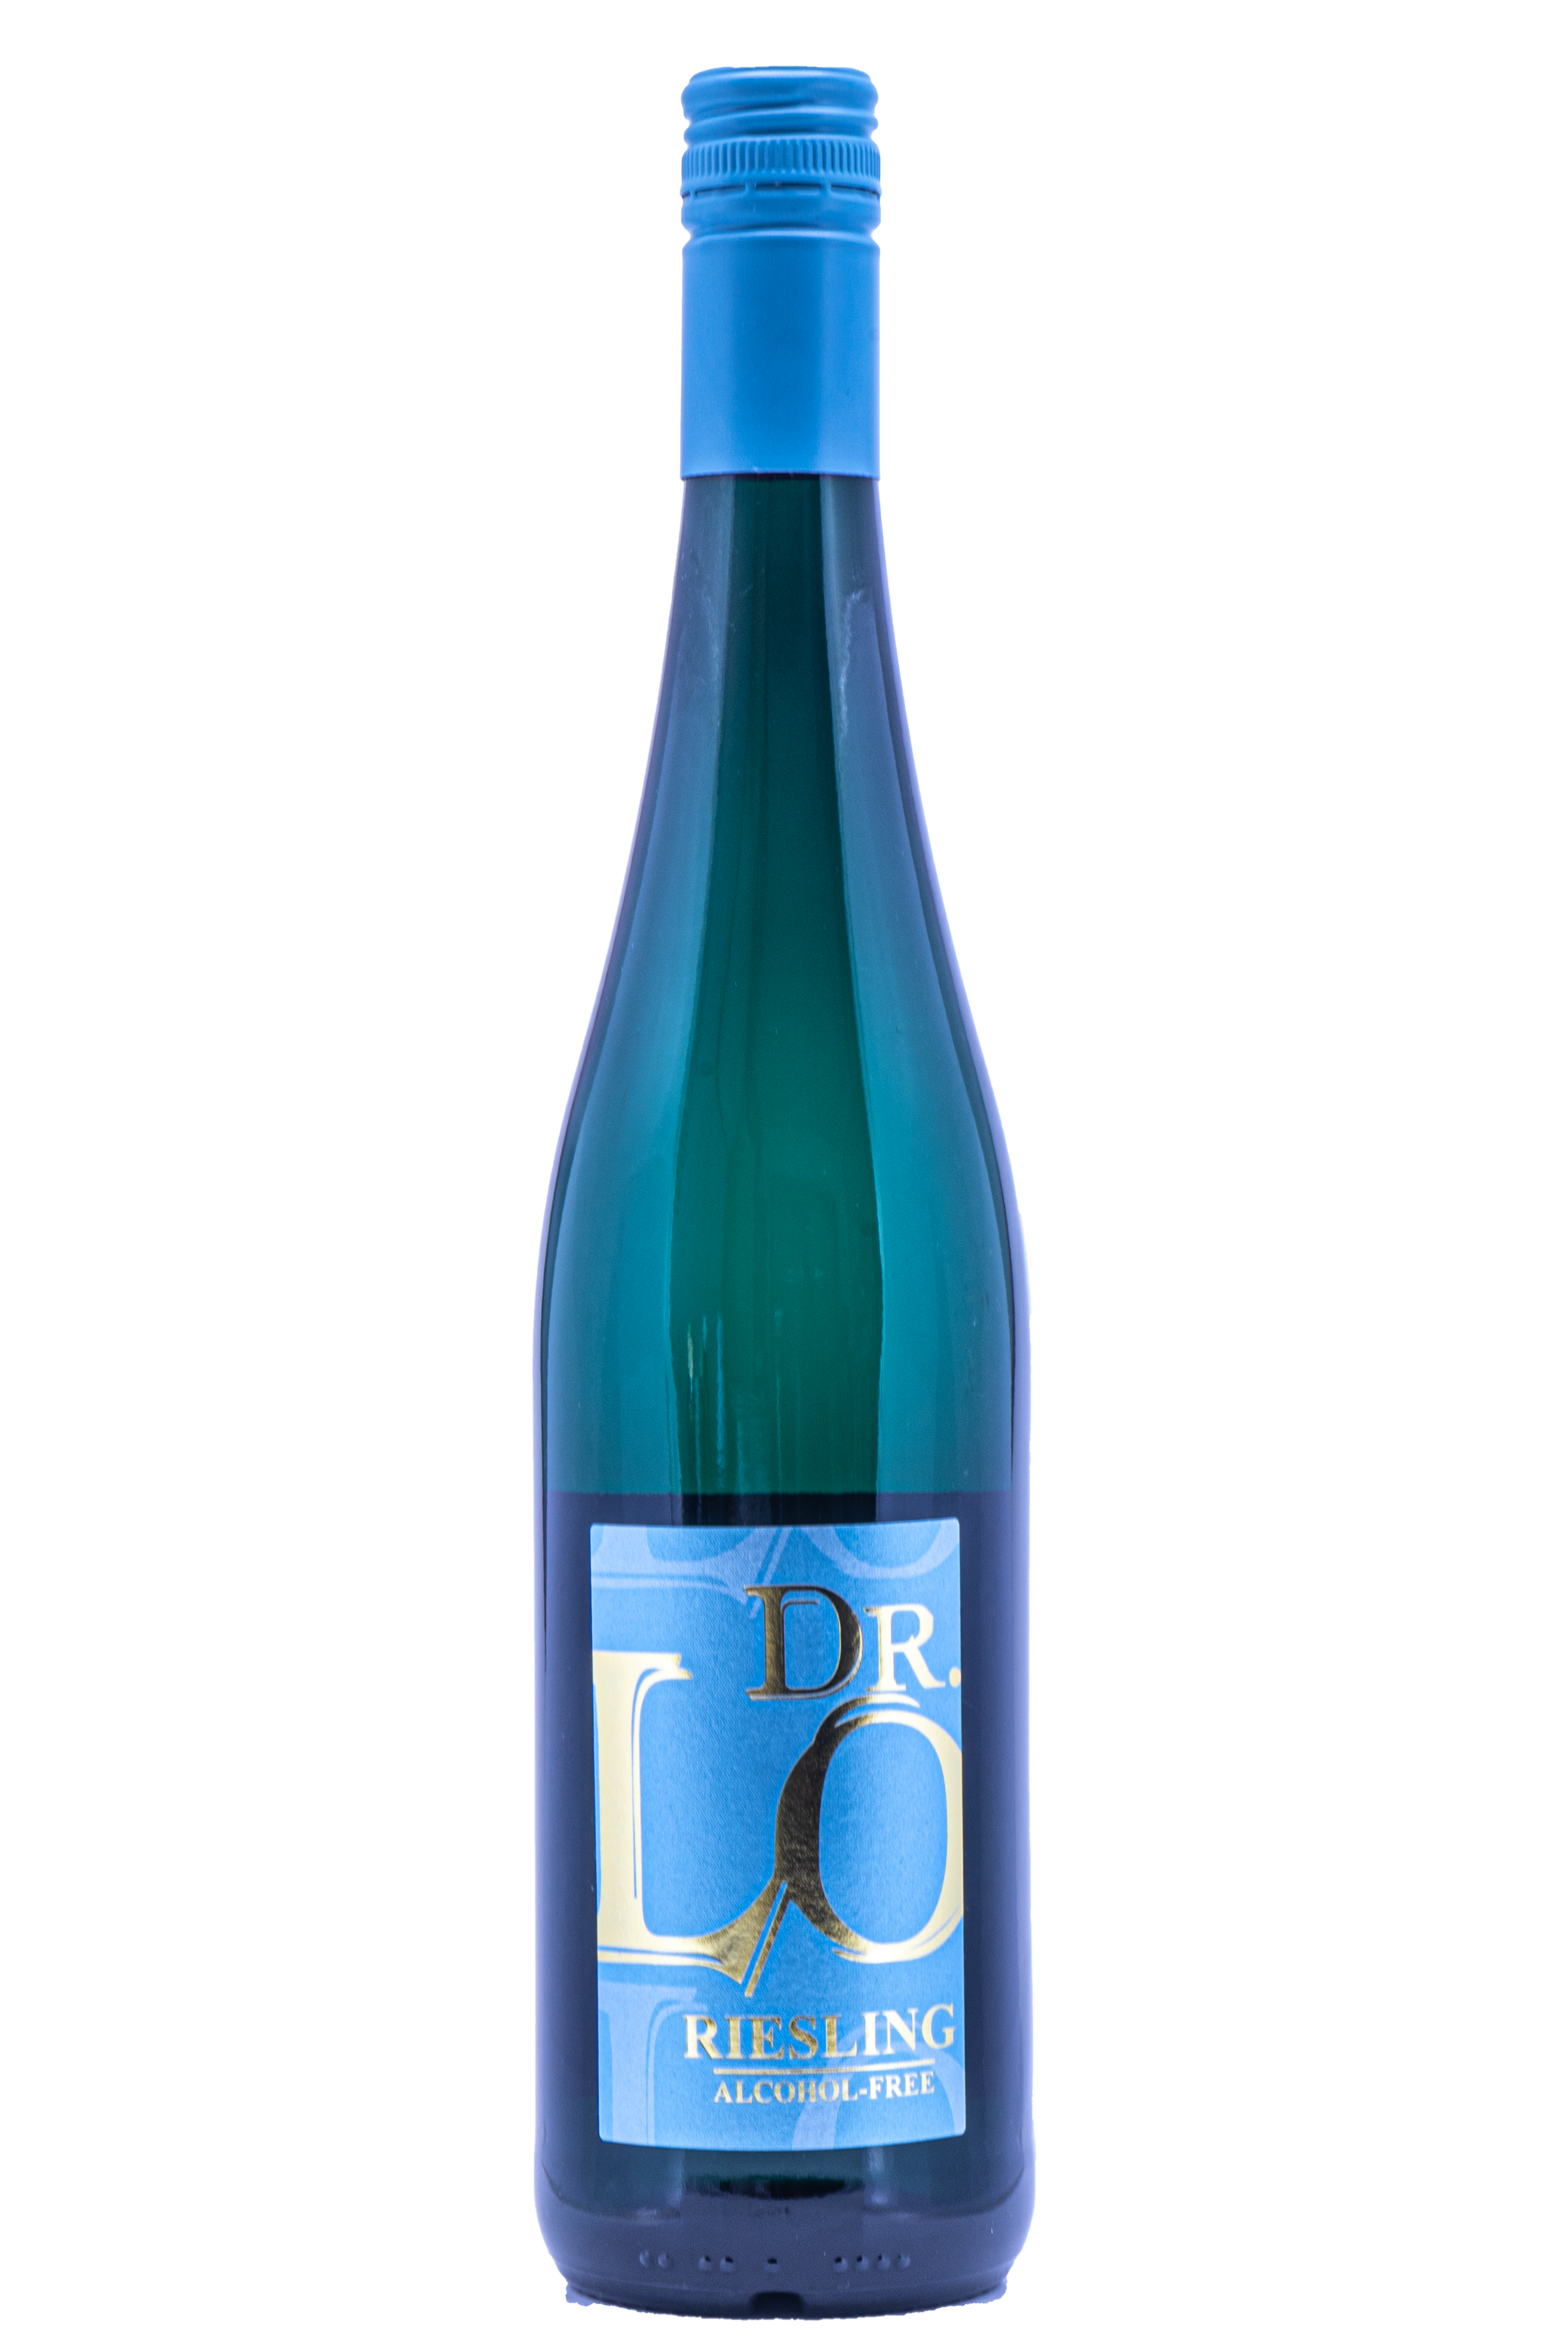 2022 DR. LO Riesling Alkoholfrei 